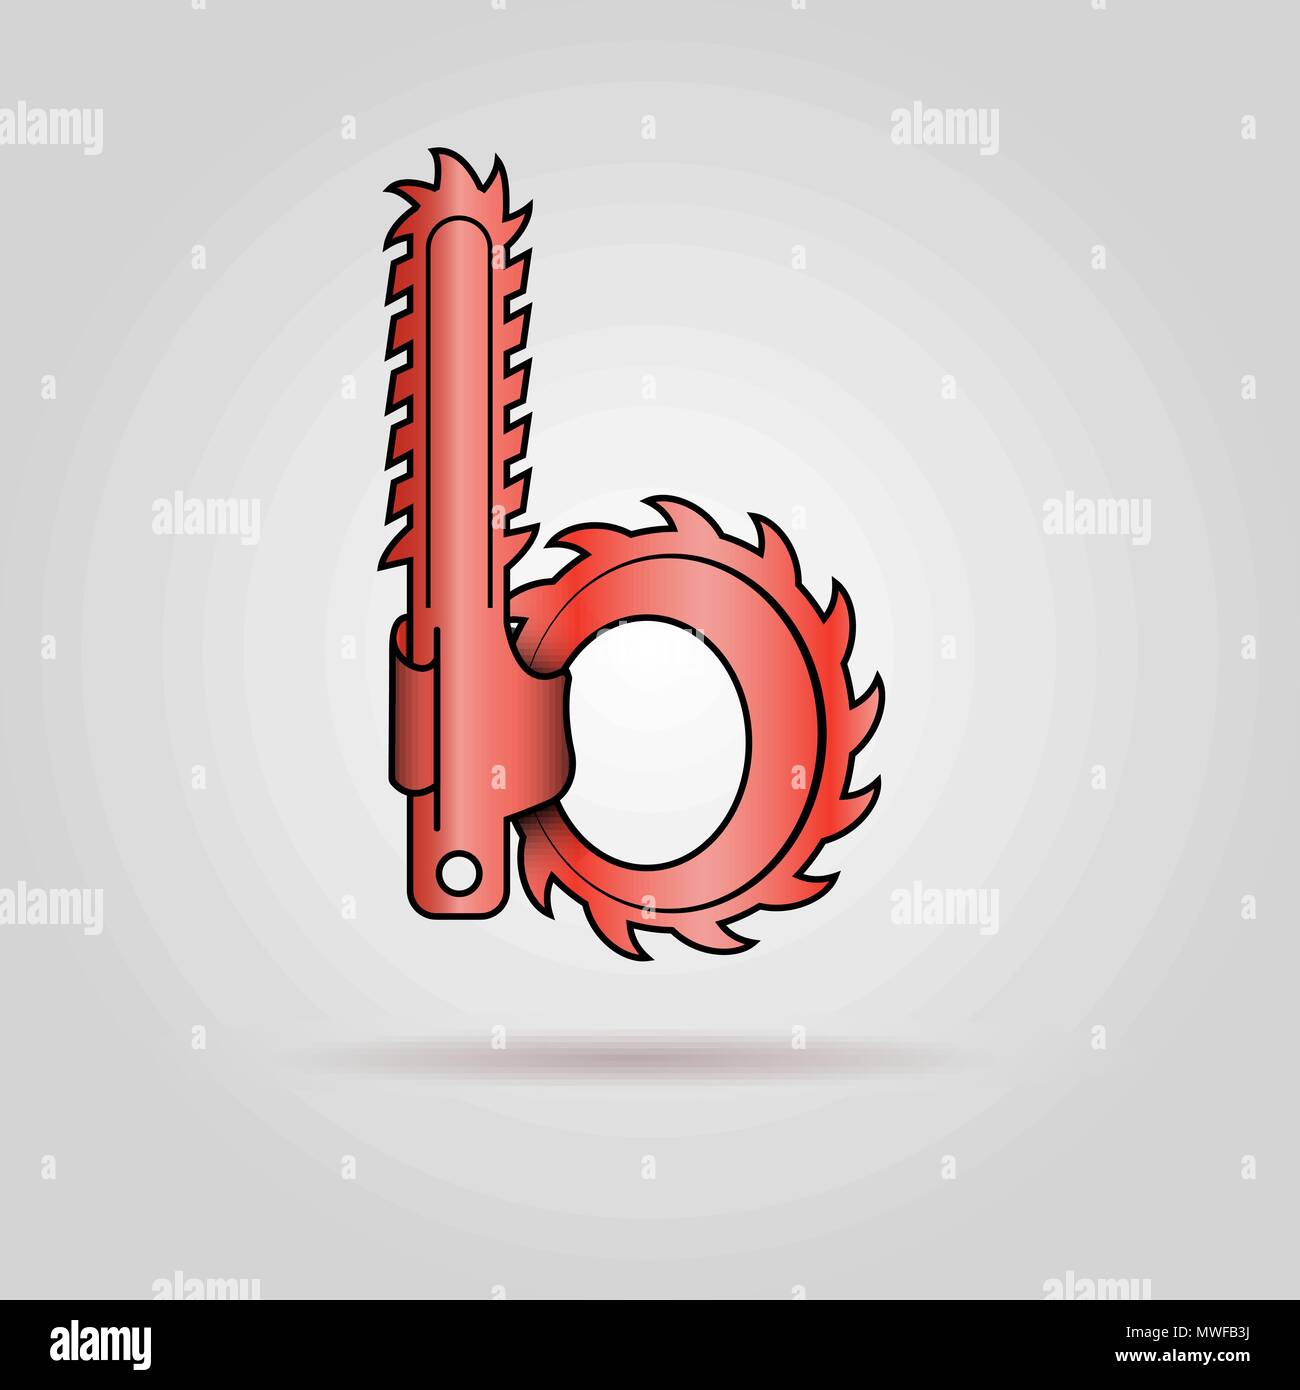 Stylized chainsaw logotype design - lowercase letter b in red color Stock Vector